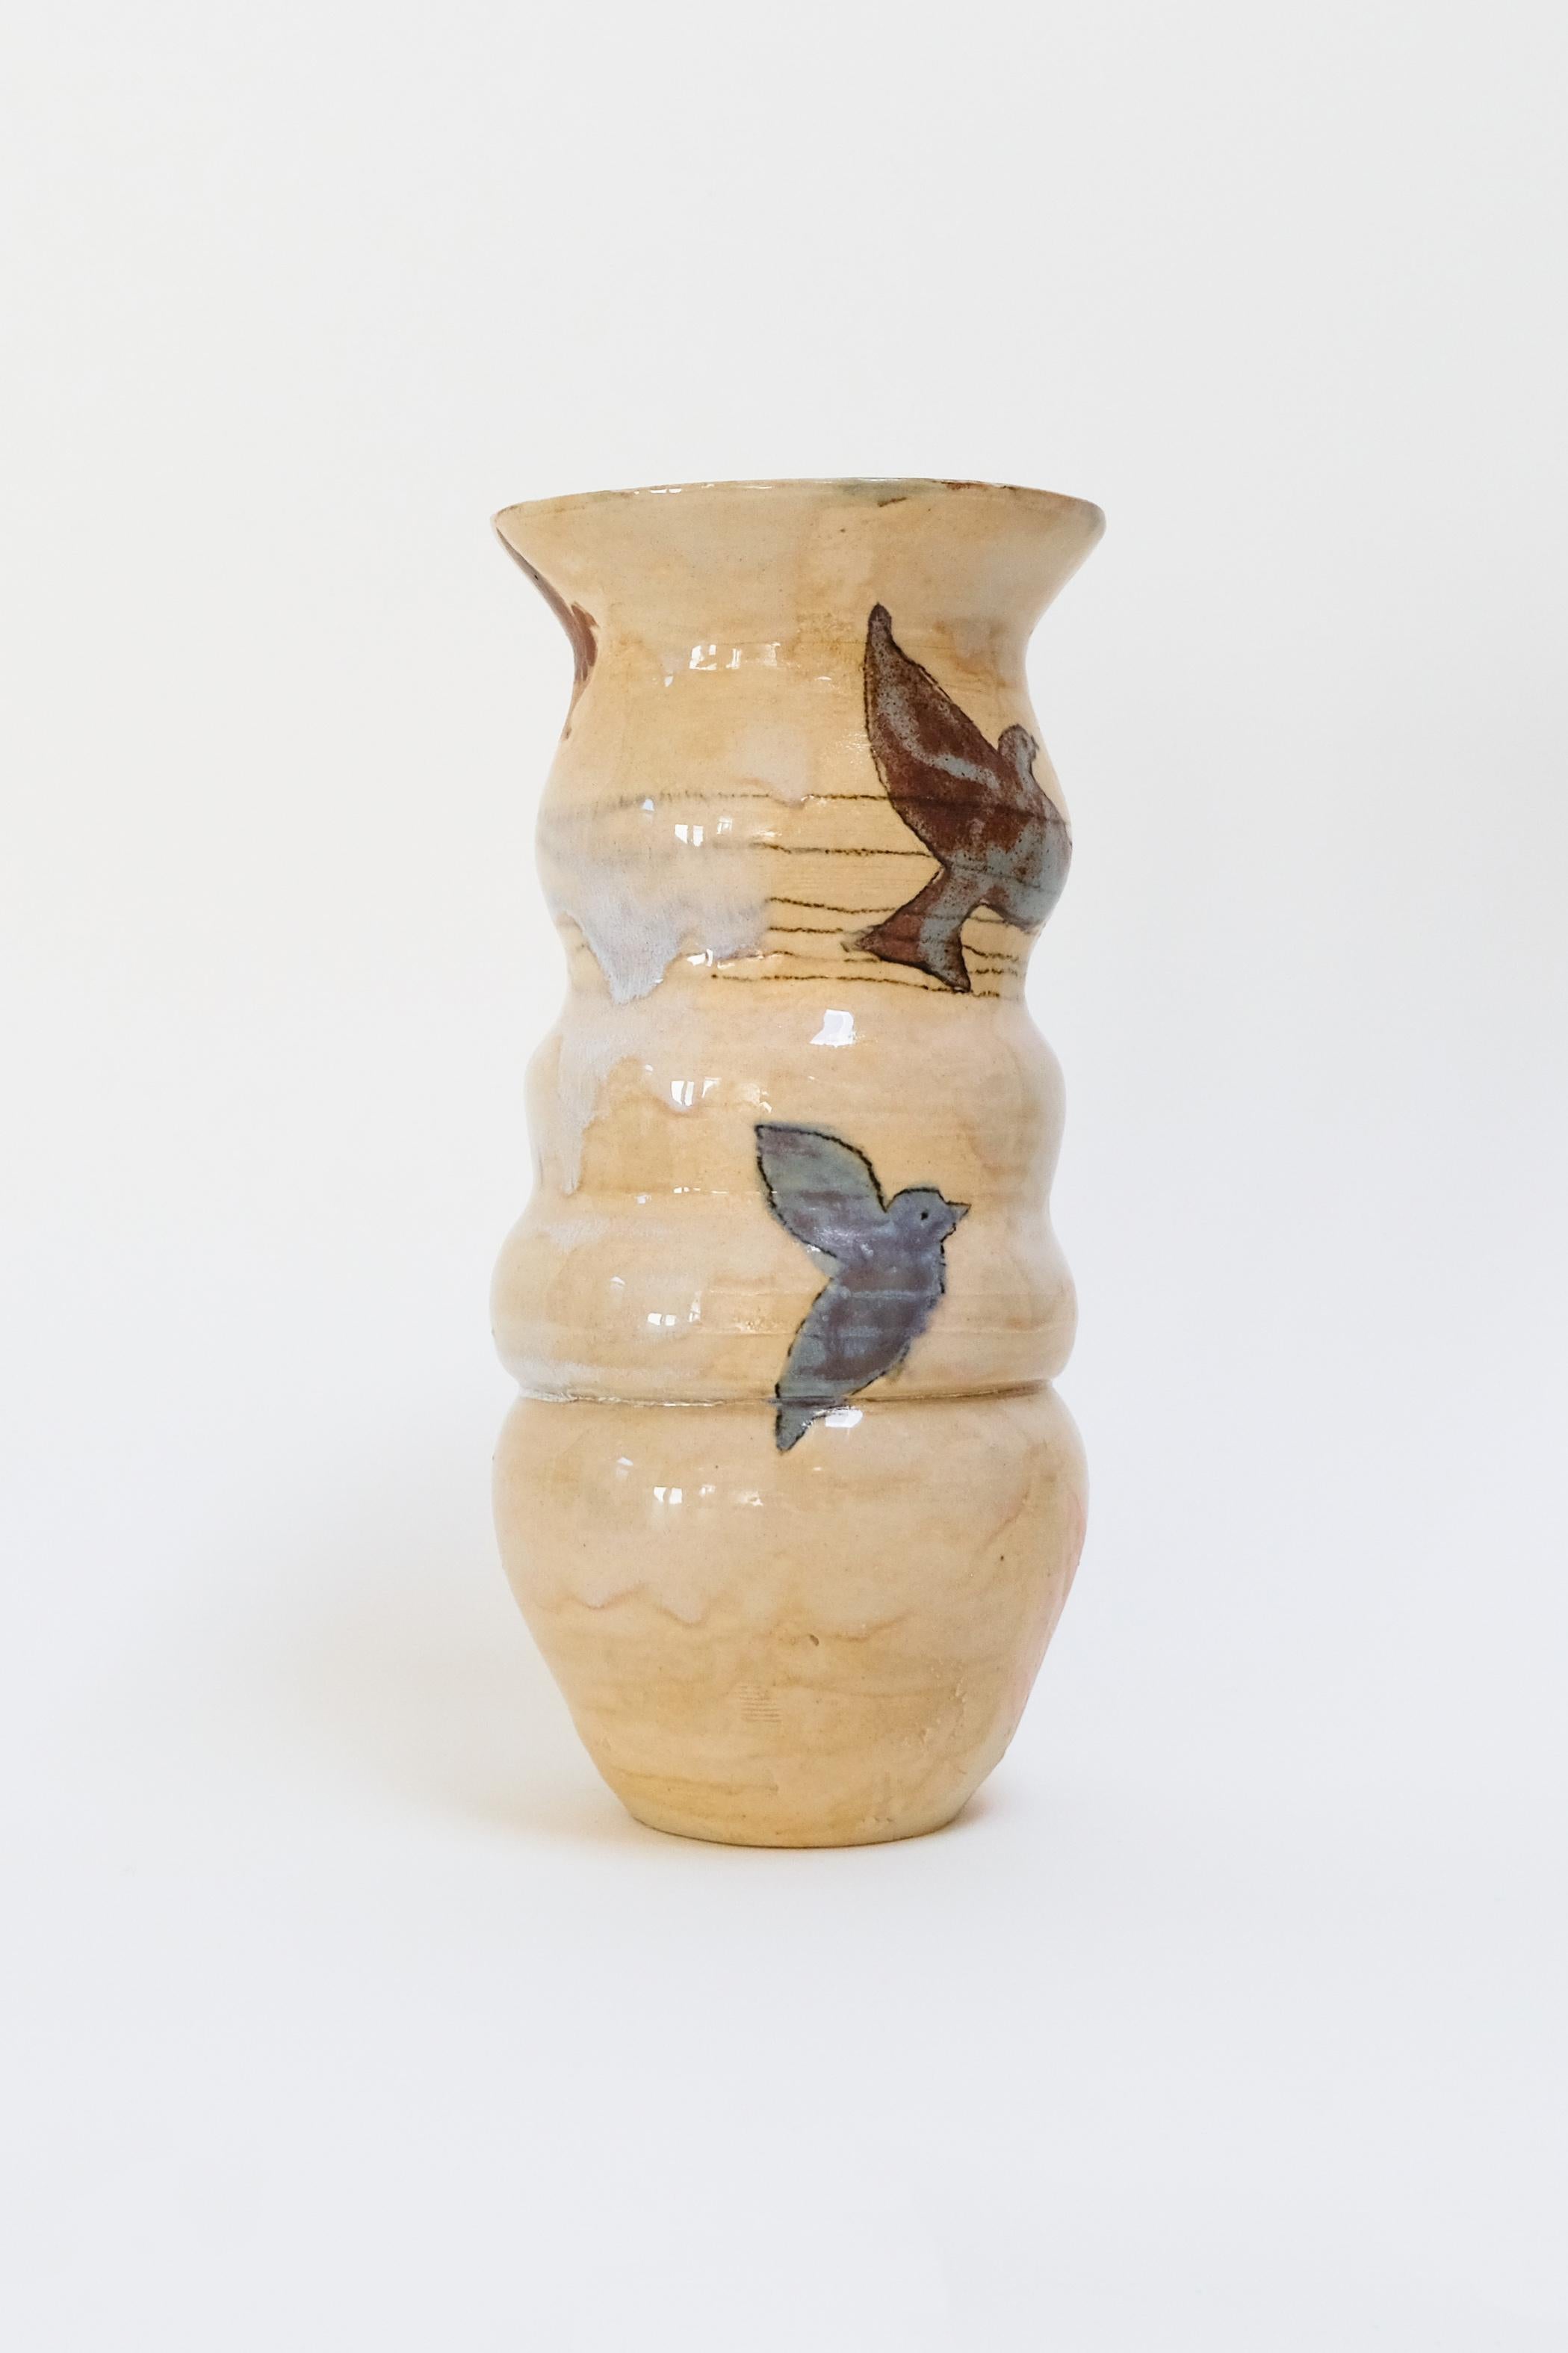 Wade Pigeons - contemporary warm ceramic vase with bird design, functional - Contemporary Sculpture by Misbah Ahmed